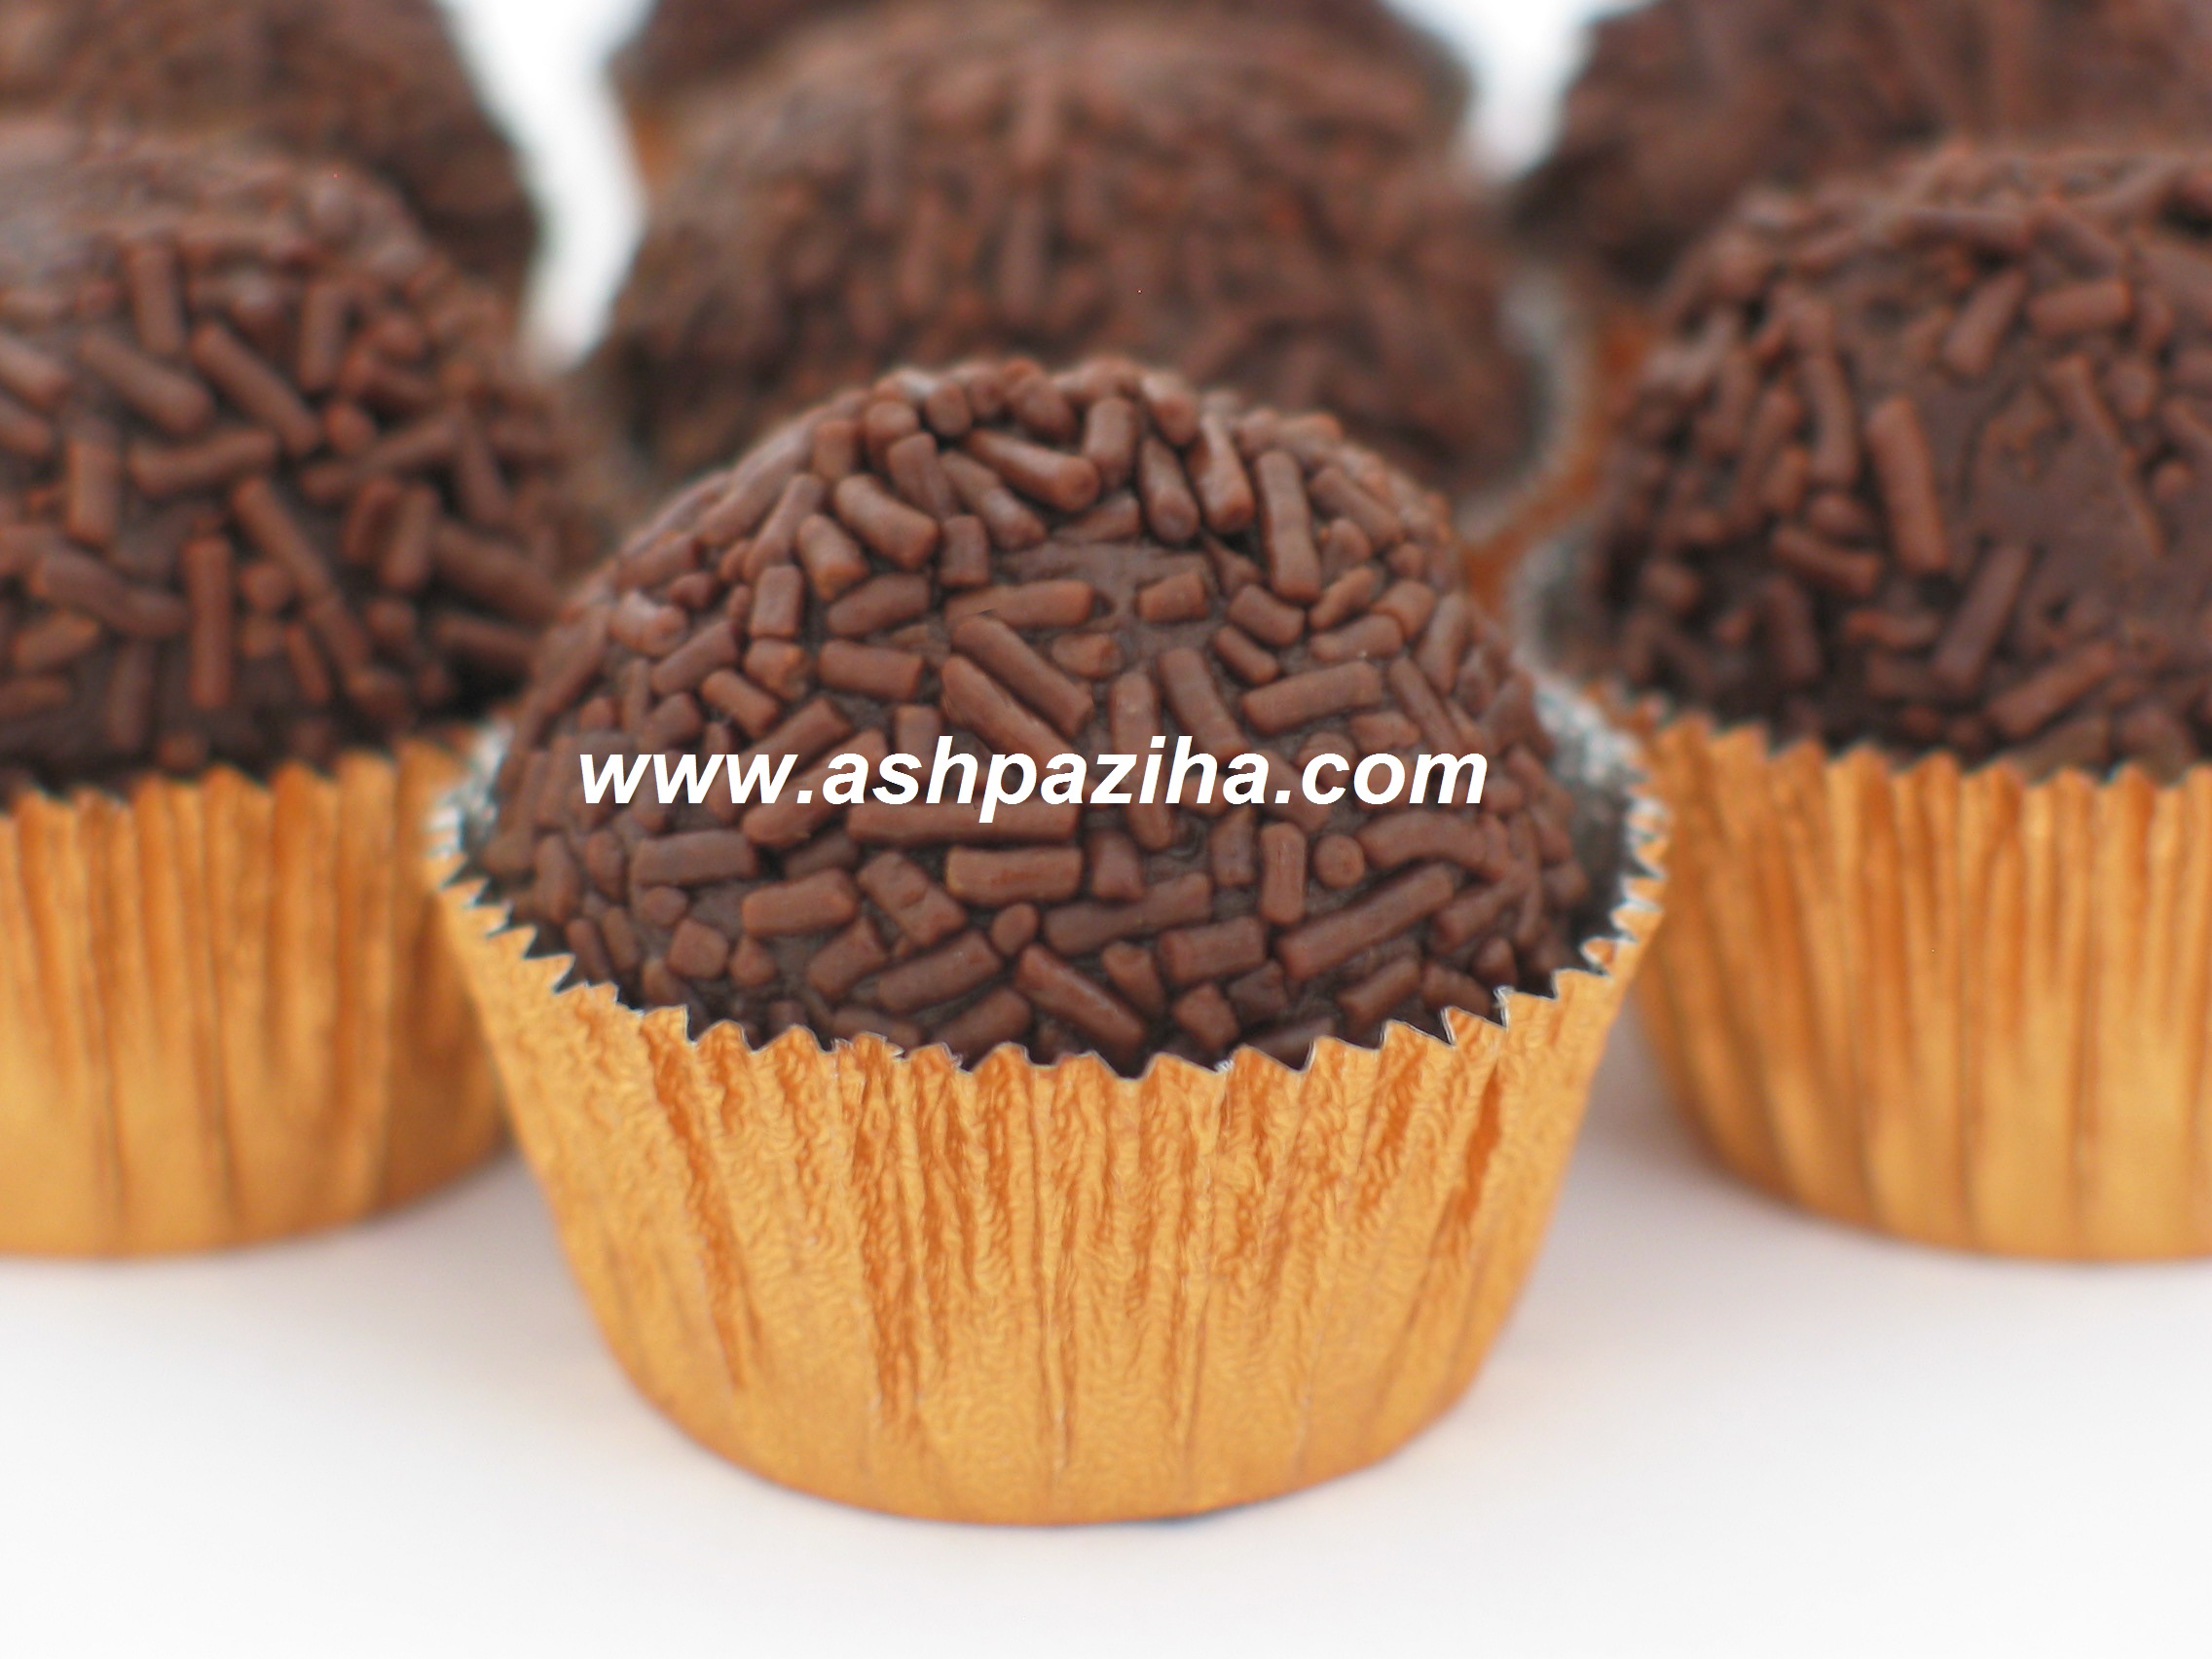 Recipes - Cooking - Muffin - Coffee - and - Chocolate (2)